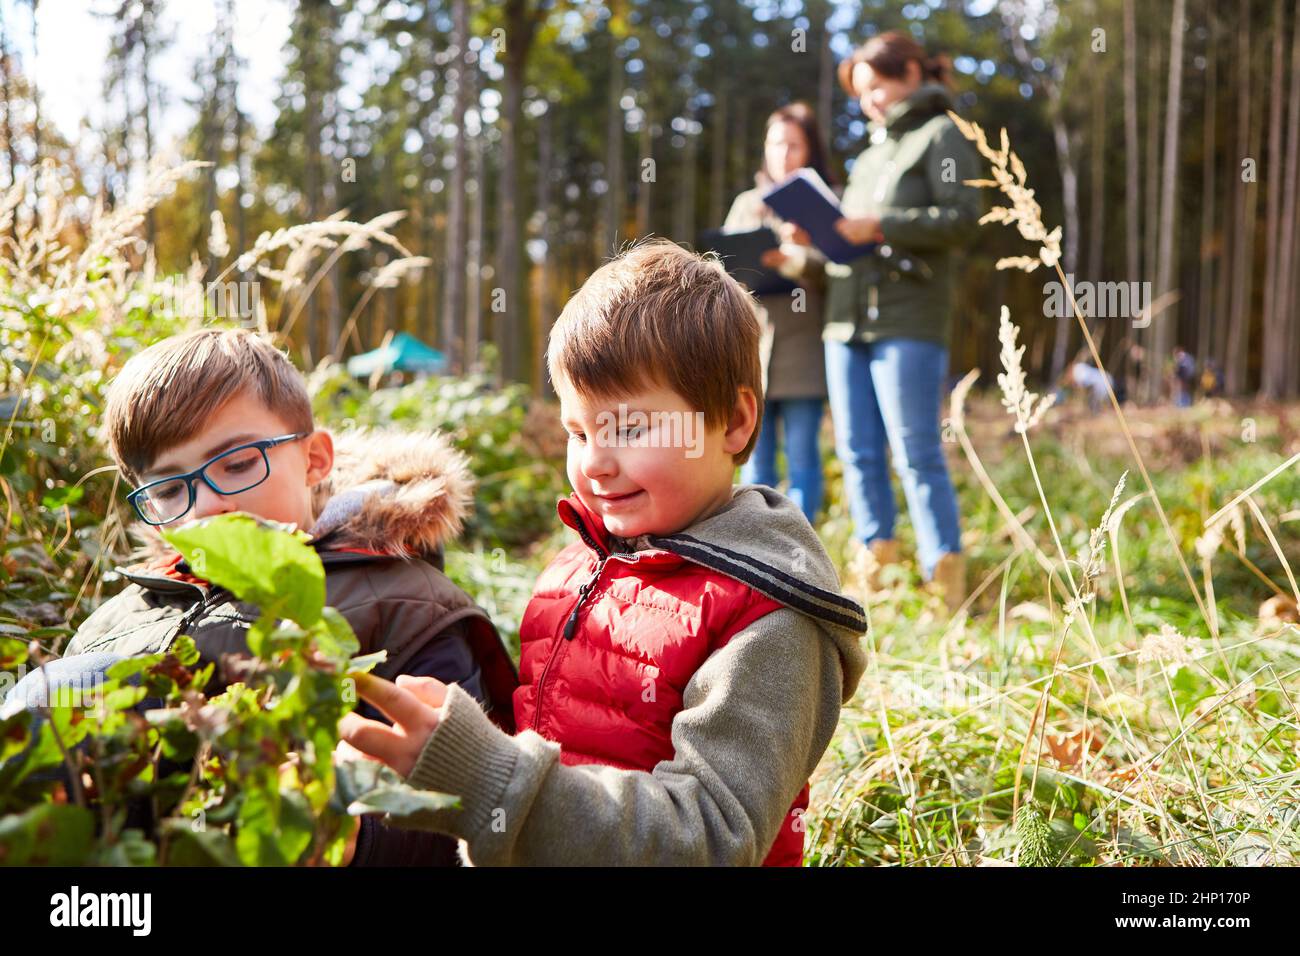 Two children identifying trees in tree science lessons as nature education in the forest Stock Photo